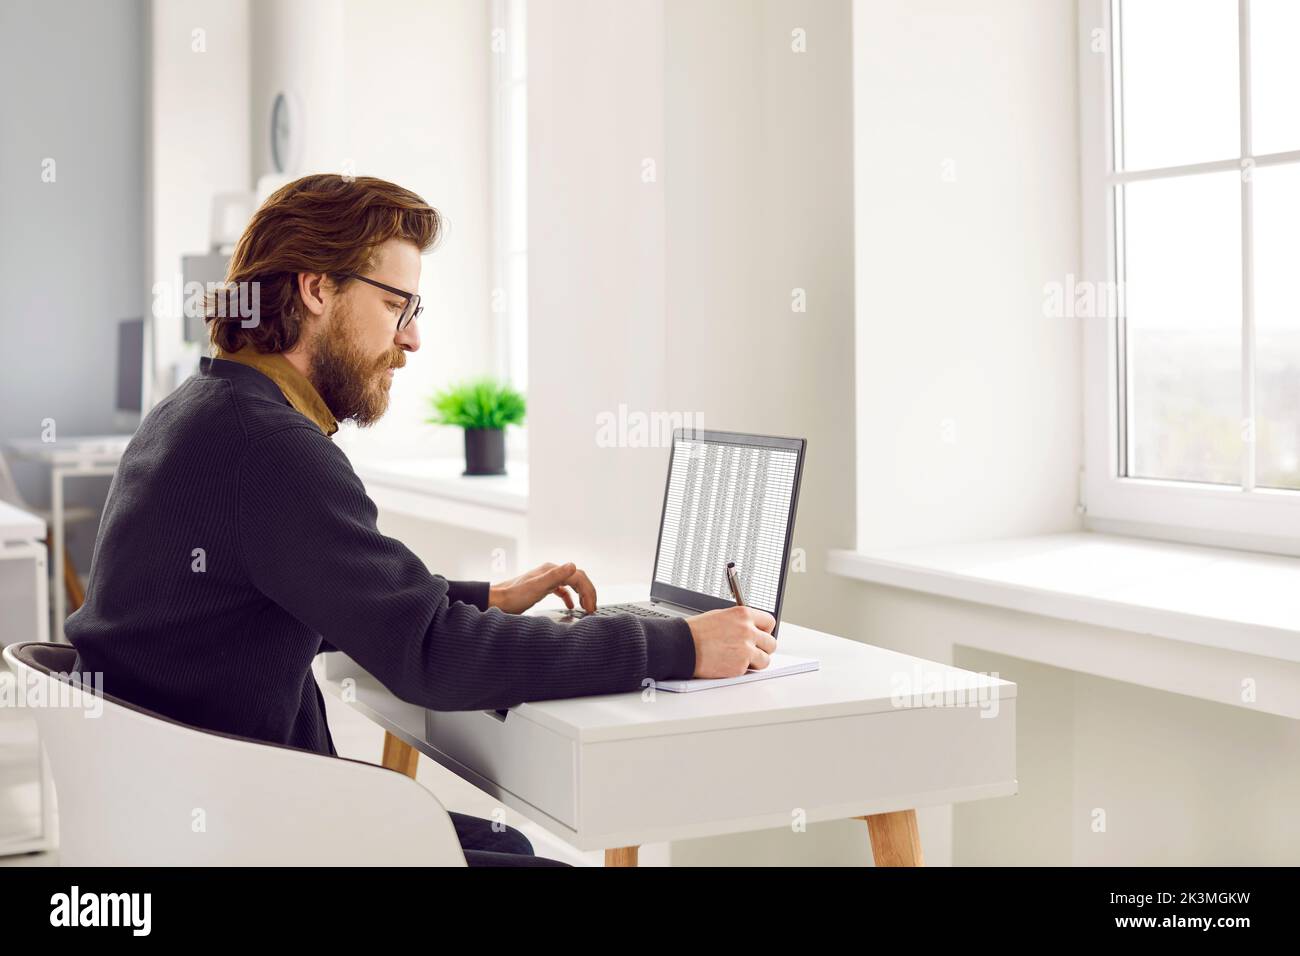 Serious man in office working with databases using laptop and Excel spreadsheet. Stock Photo